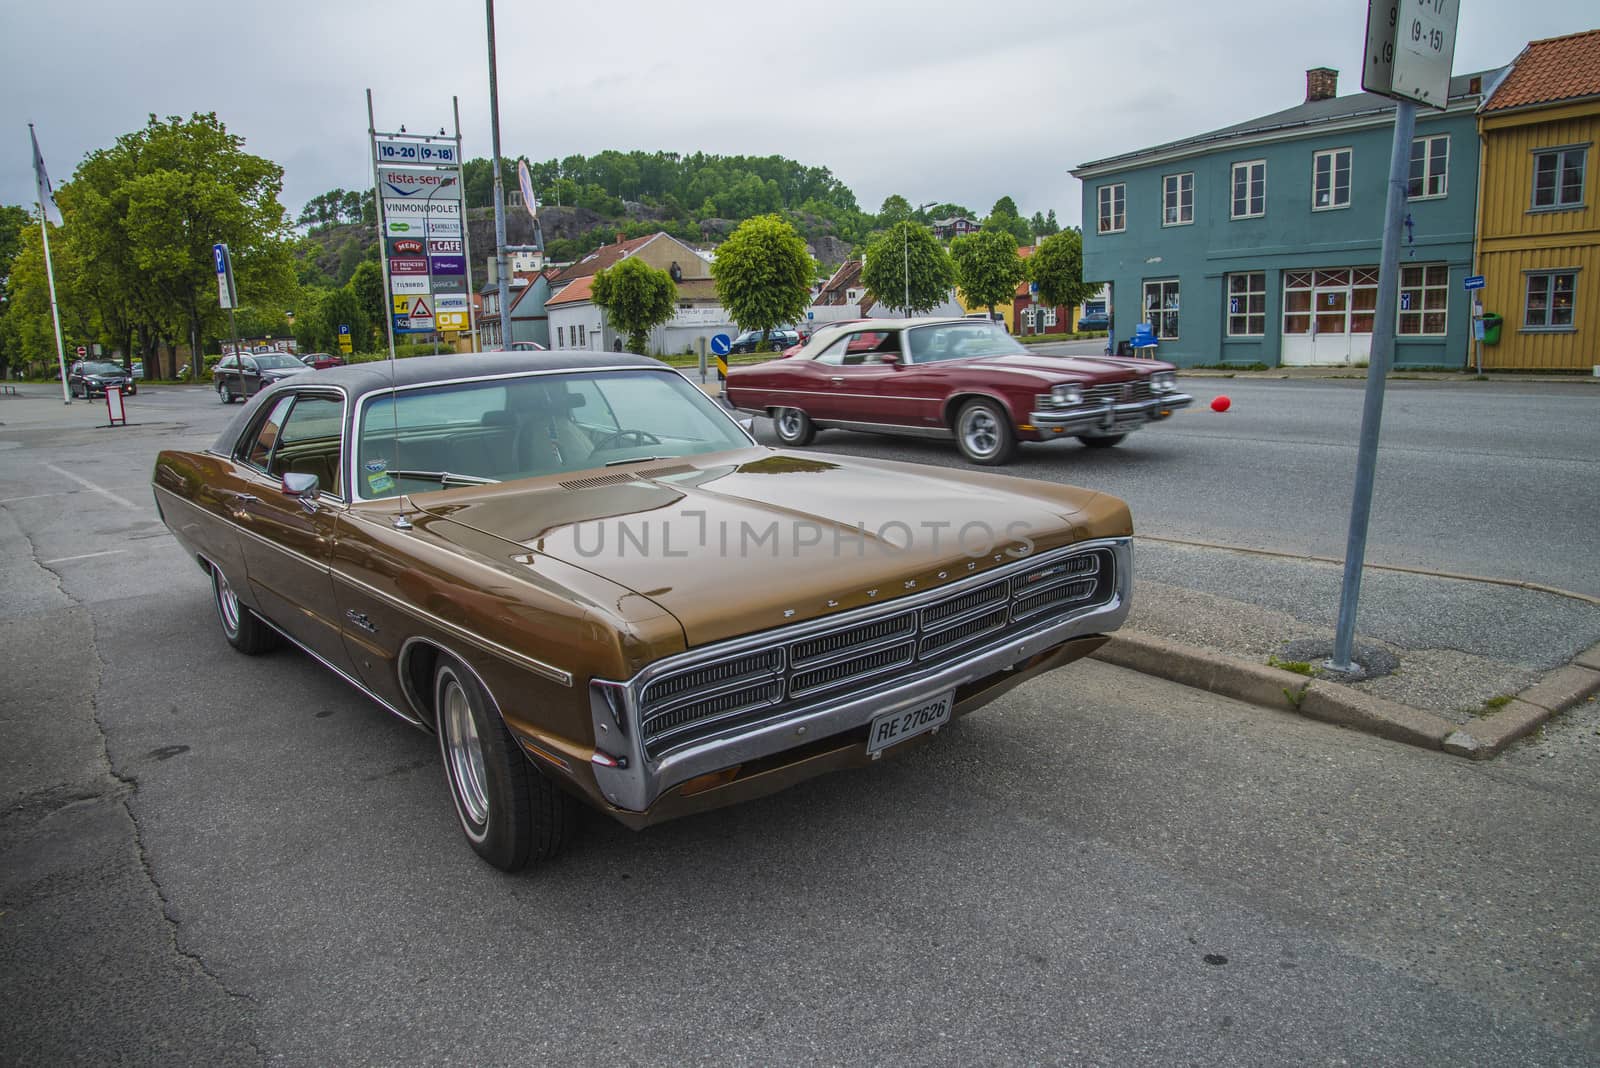 classic amcar, 1971 plymouth sport fury by steirus